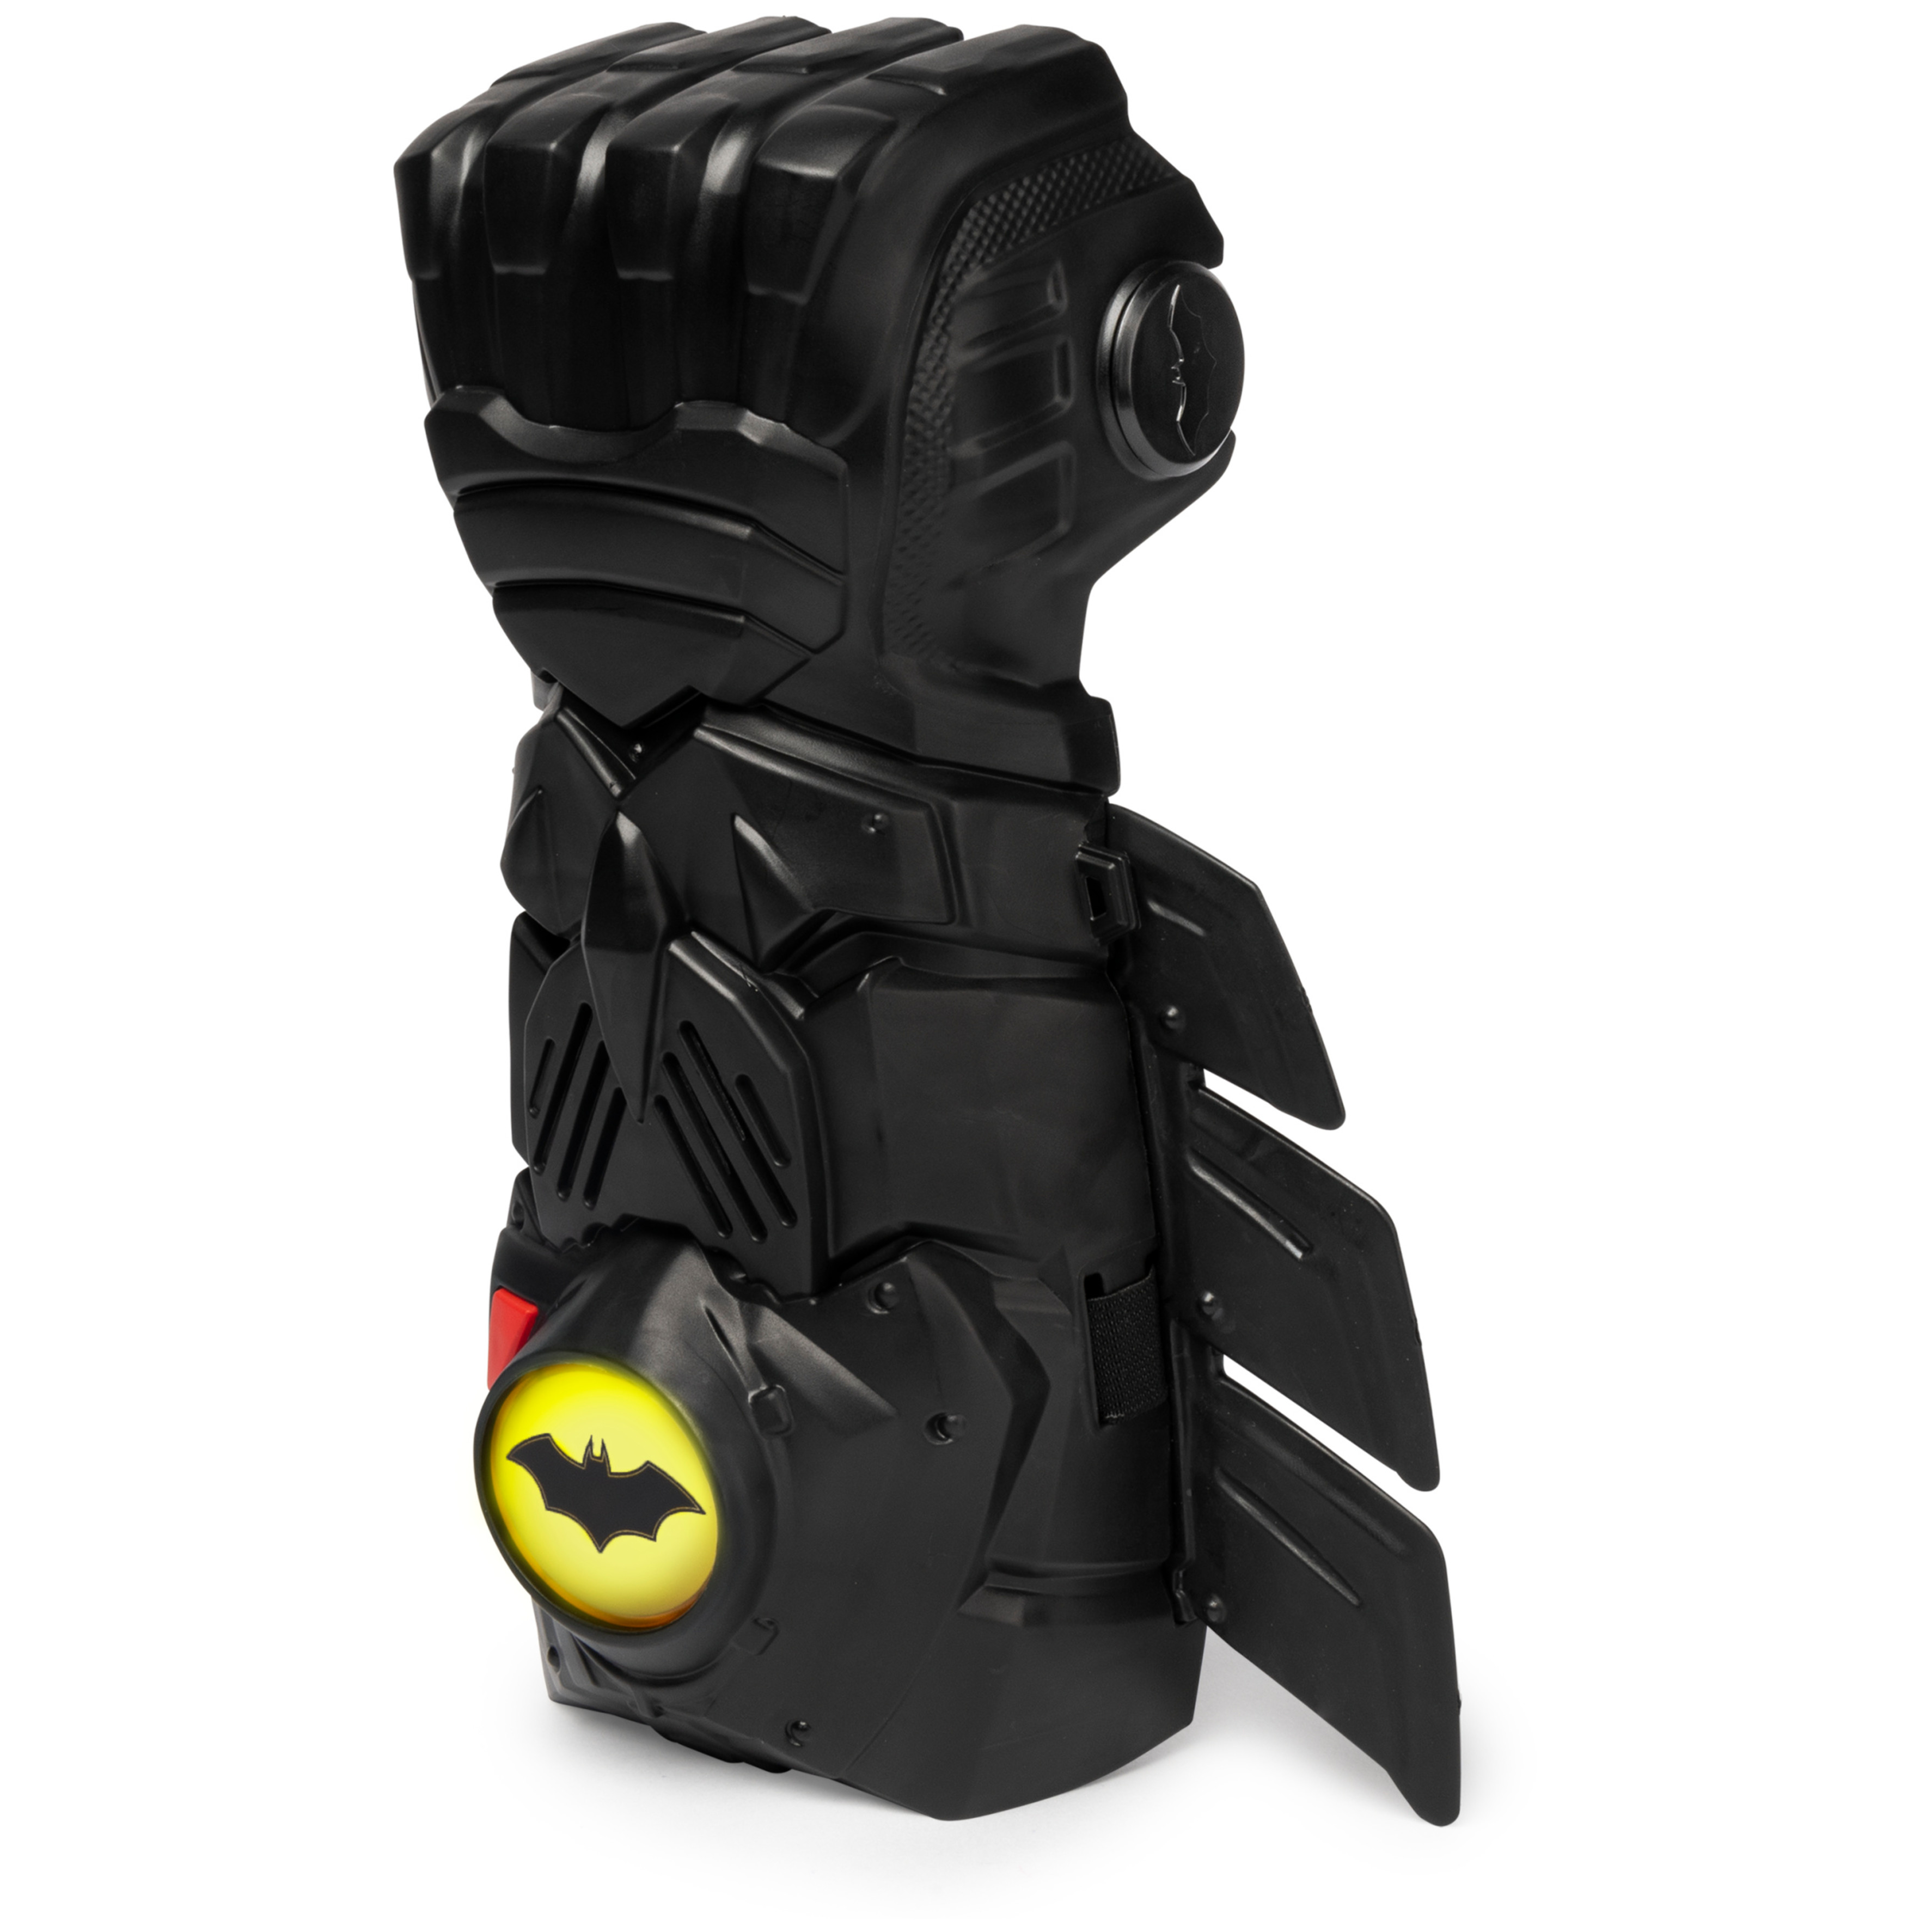 BATMAN, Interactive Gauntlet with Over 15 Phrases and Sounds, Kids Toys for Boys Aged 4 and Up - image 5 of 6